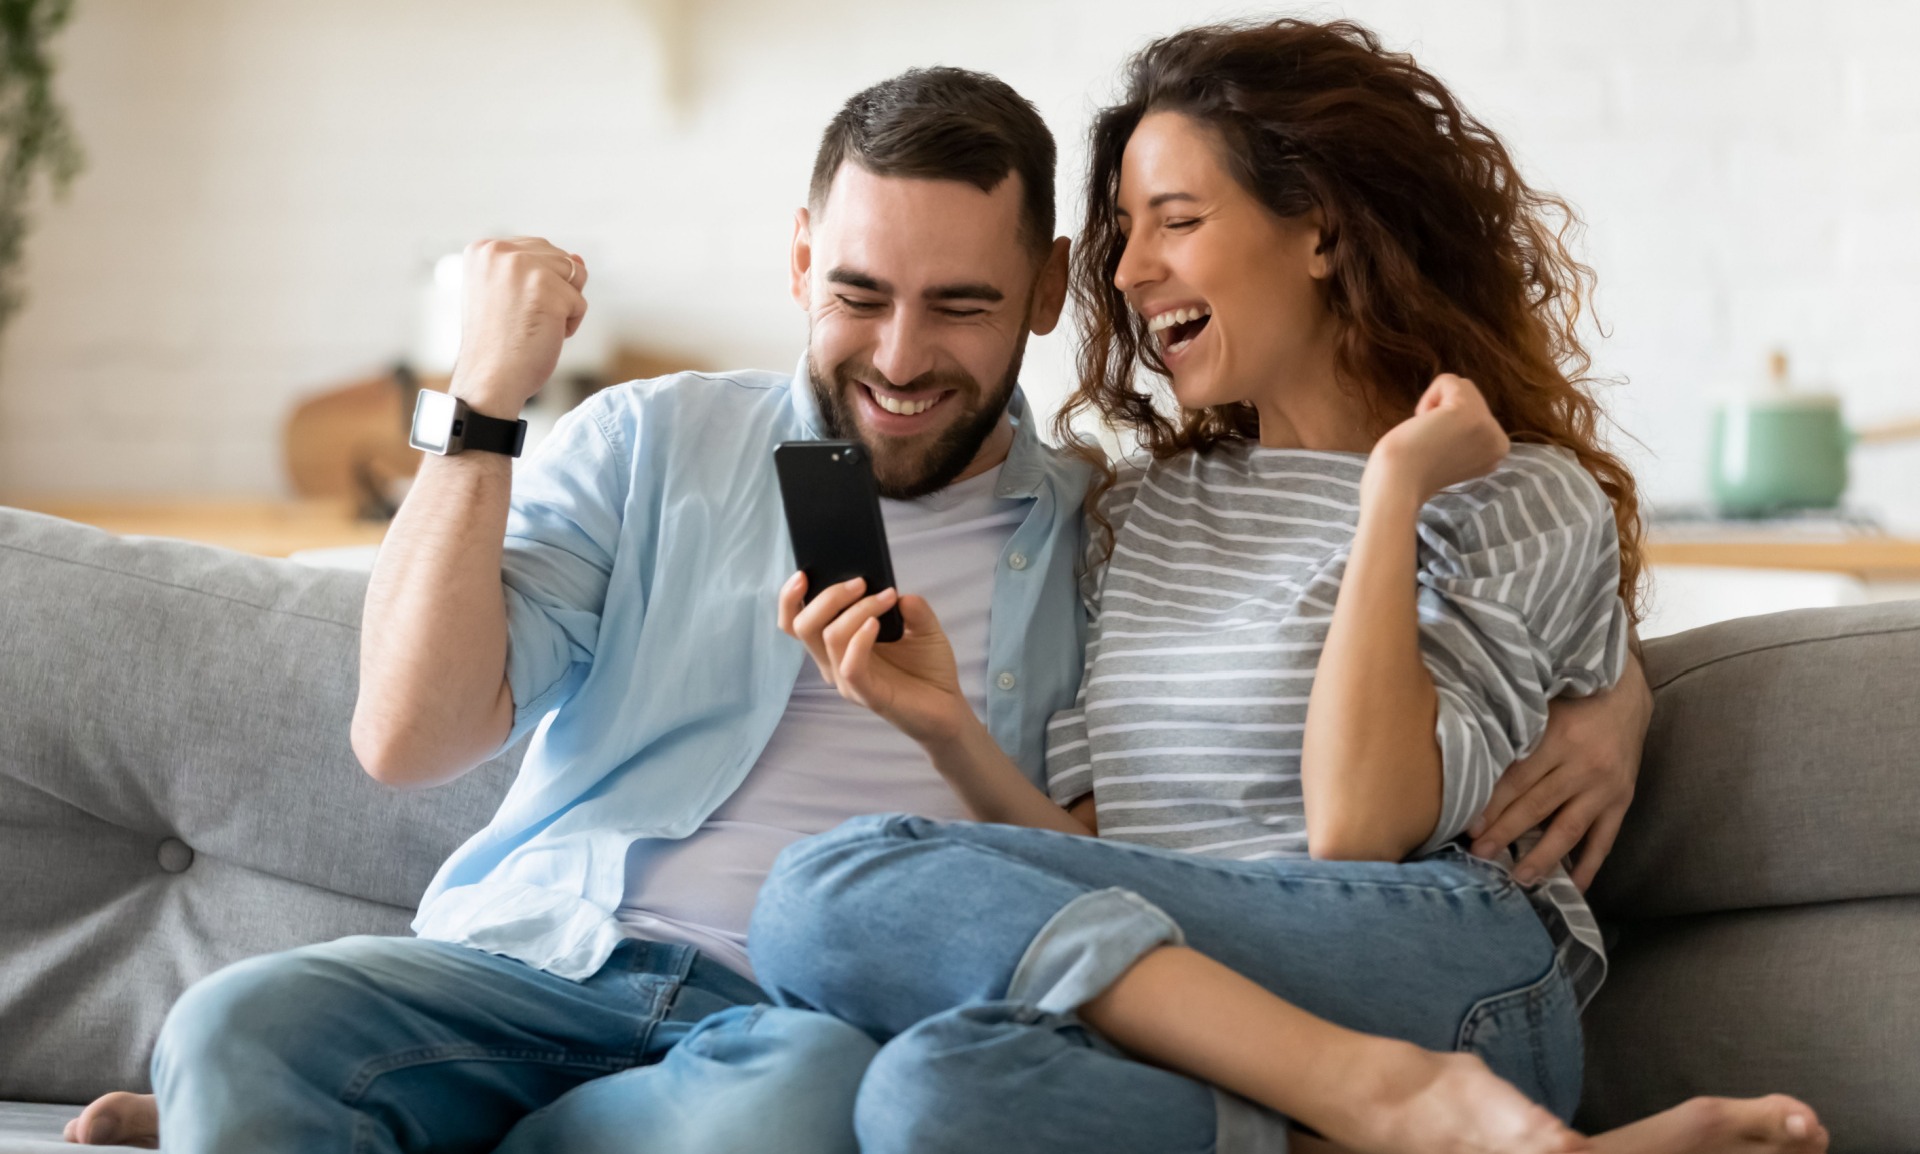 Young couple on their smartphone celebrating their matched betting side hustle win. 